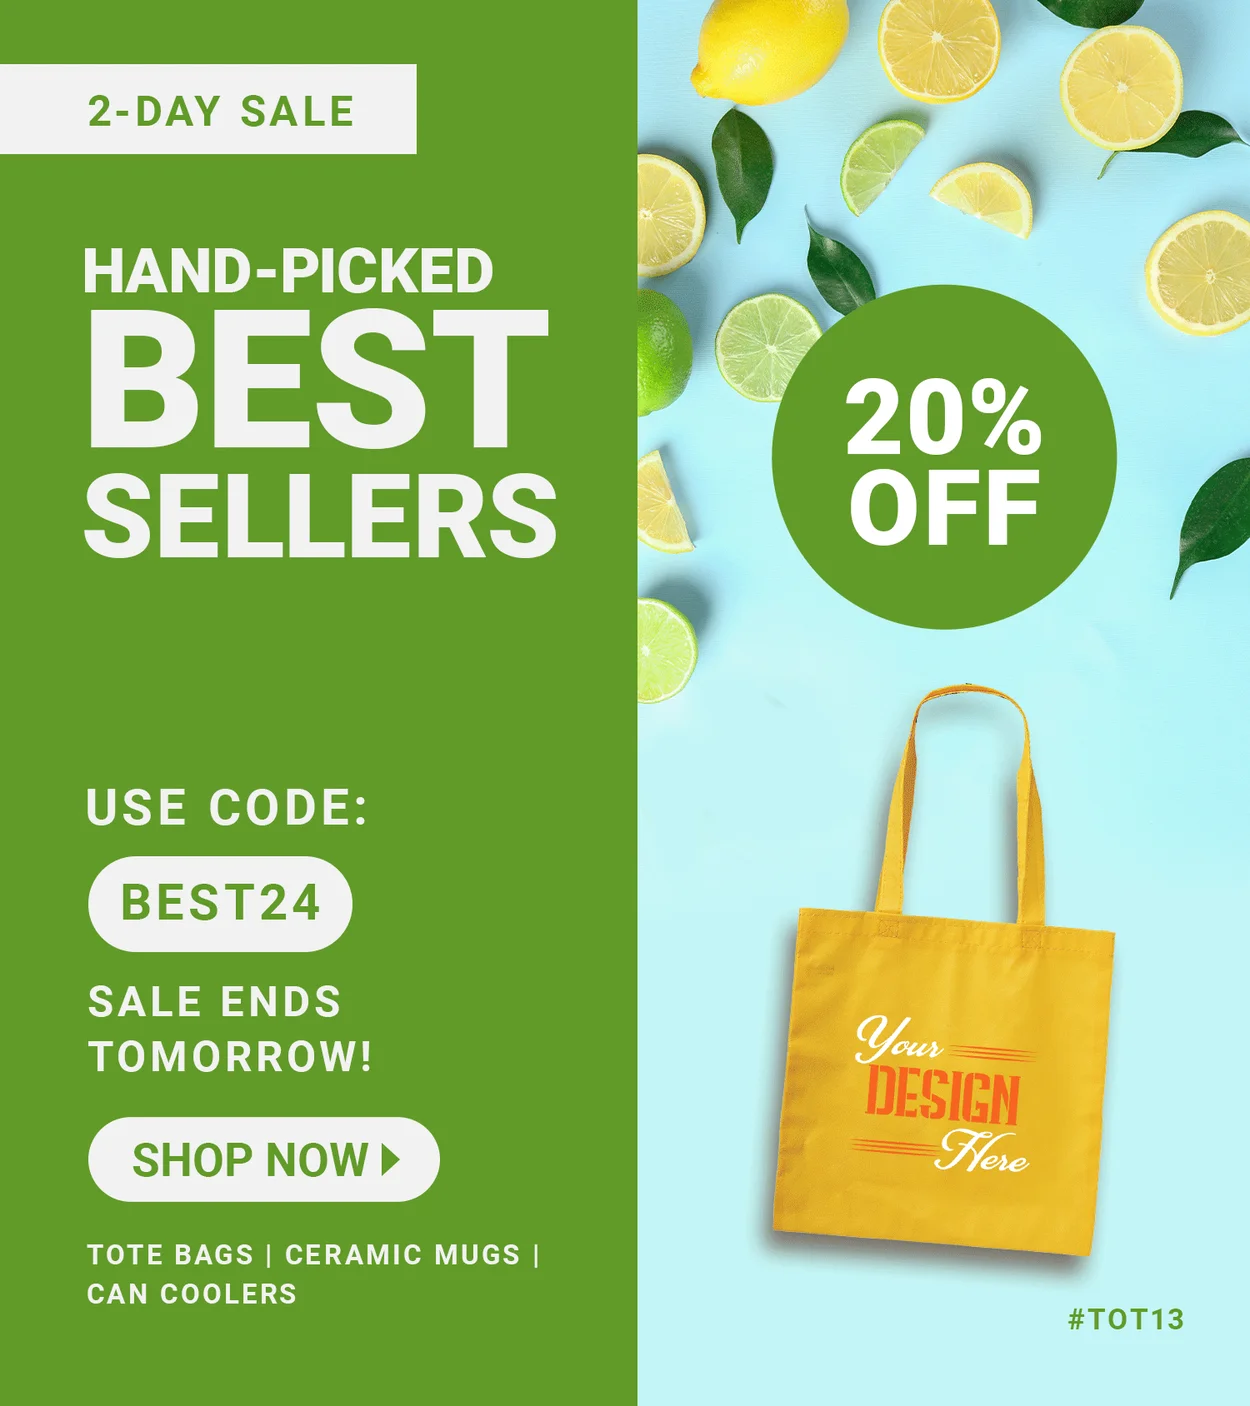 Hand-Picked Best Sellers | 20% Off | Use Code: BEST24 | Shop Now | Discount applied to tote bags, ceramic mugs and can coolers.